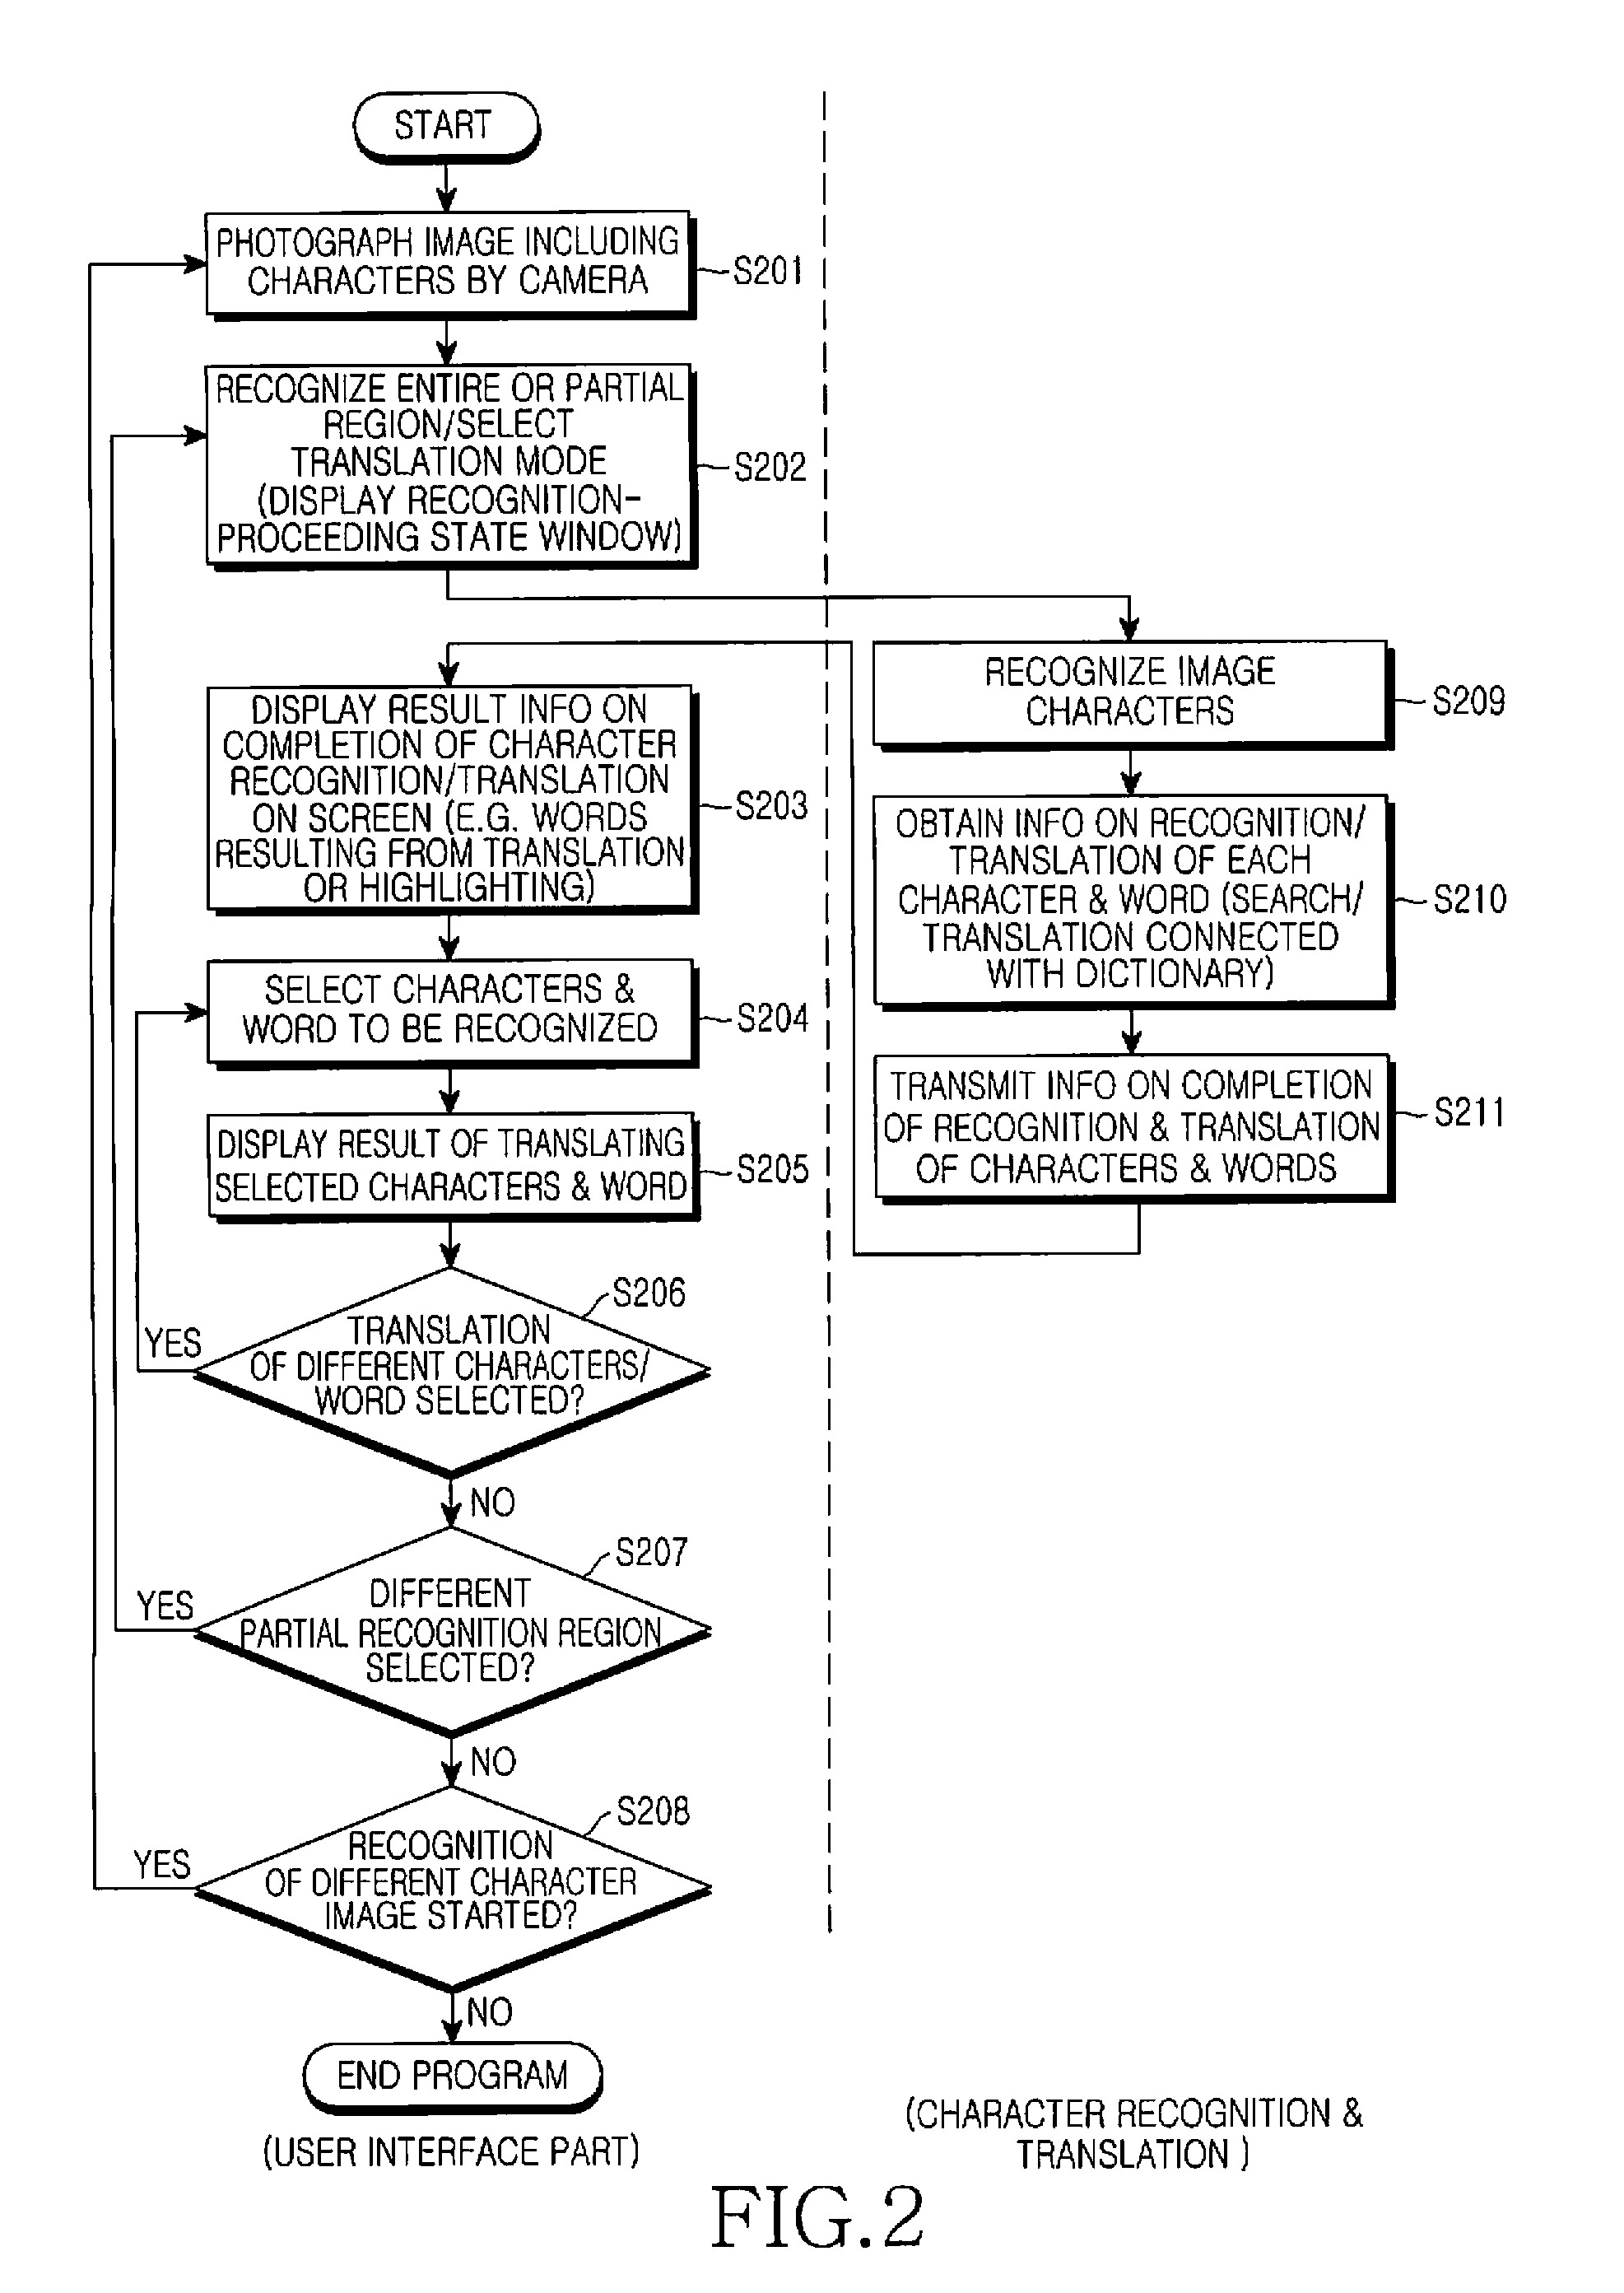 Method for recognizing and translating characters in camera-based image